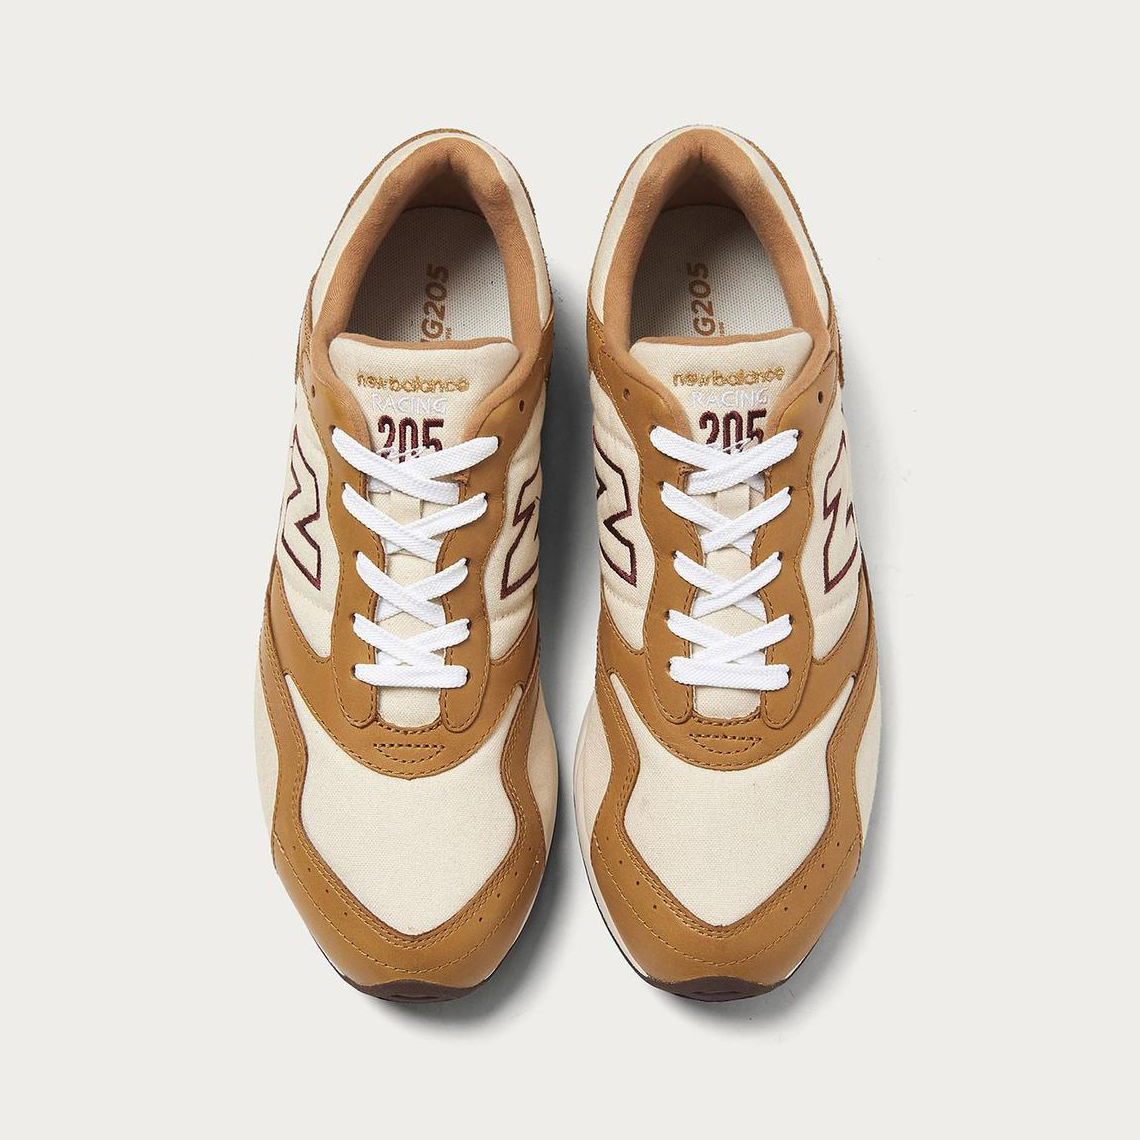 United Arrows New Balance Rc205 Brown 5